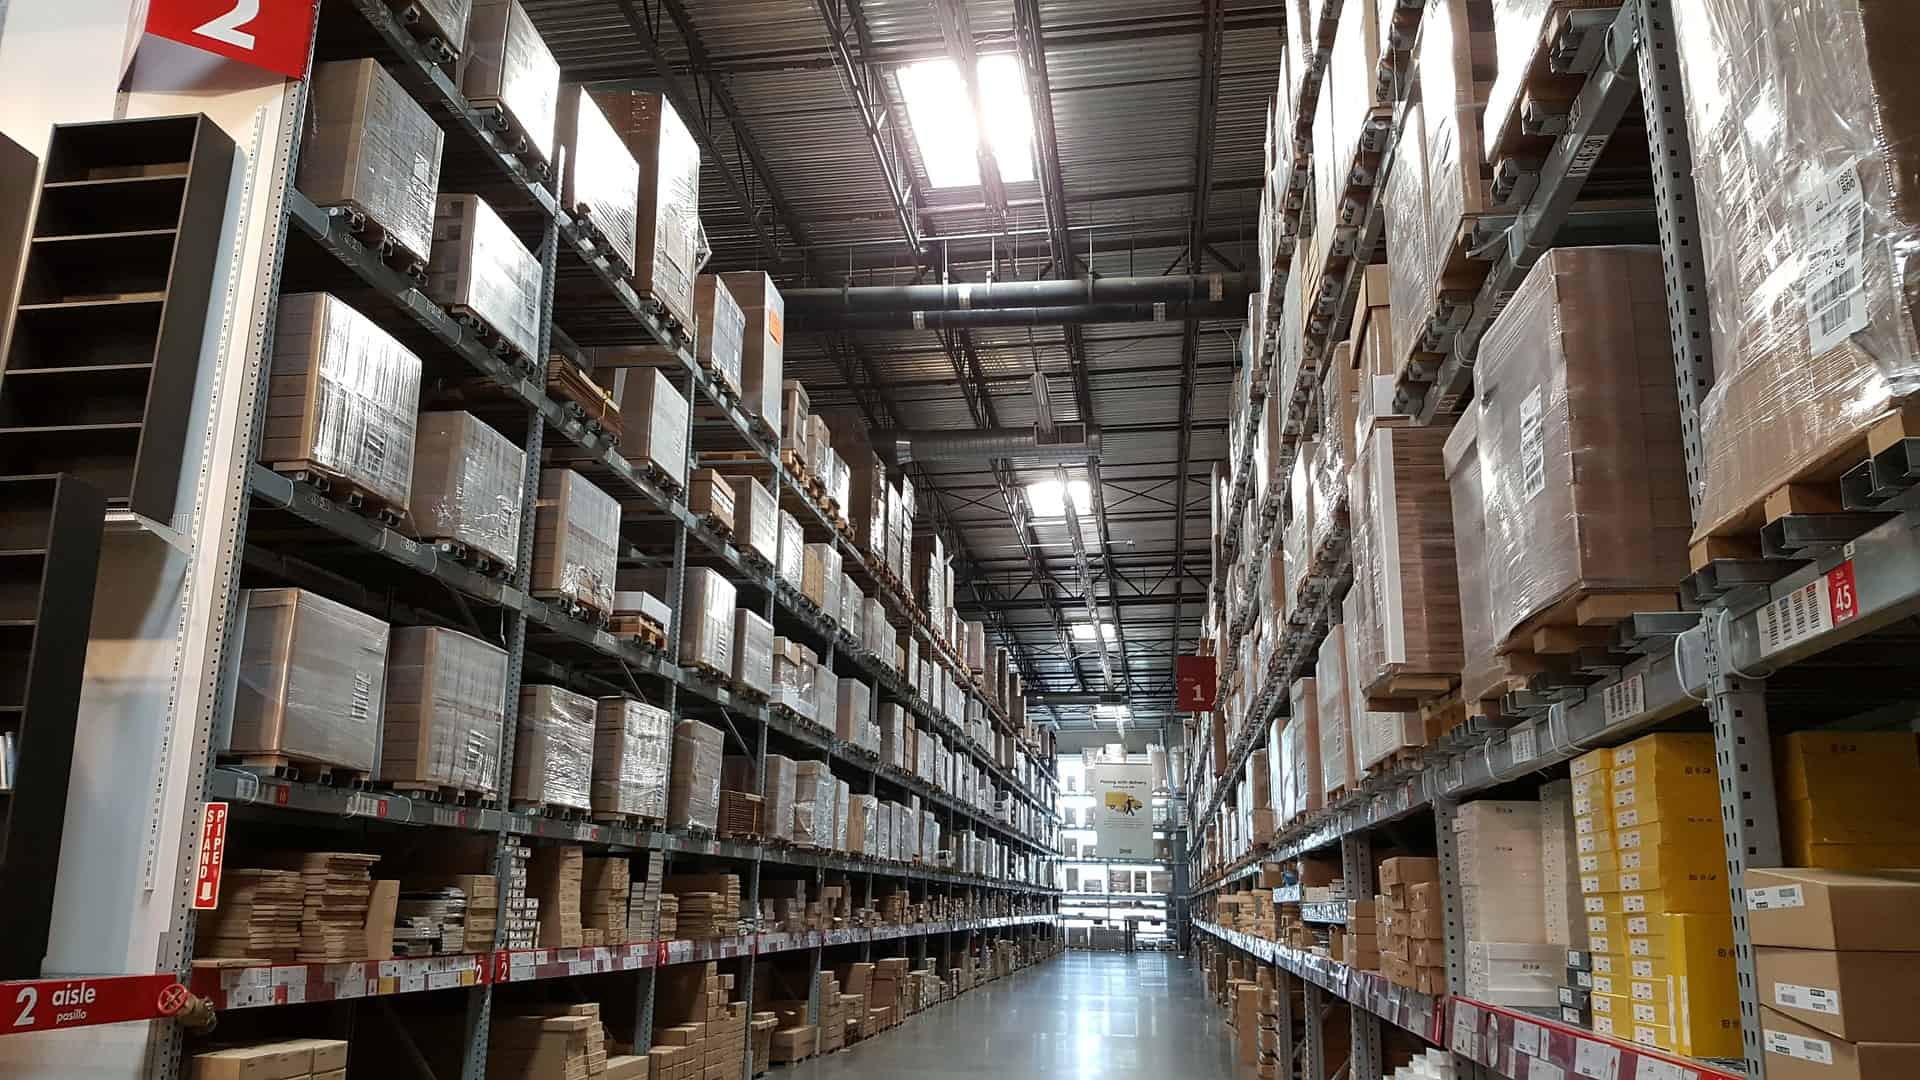 View of an aisle in a warehouse full of boxes